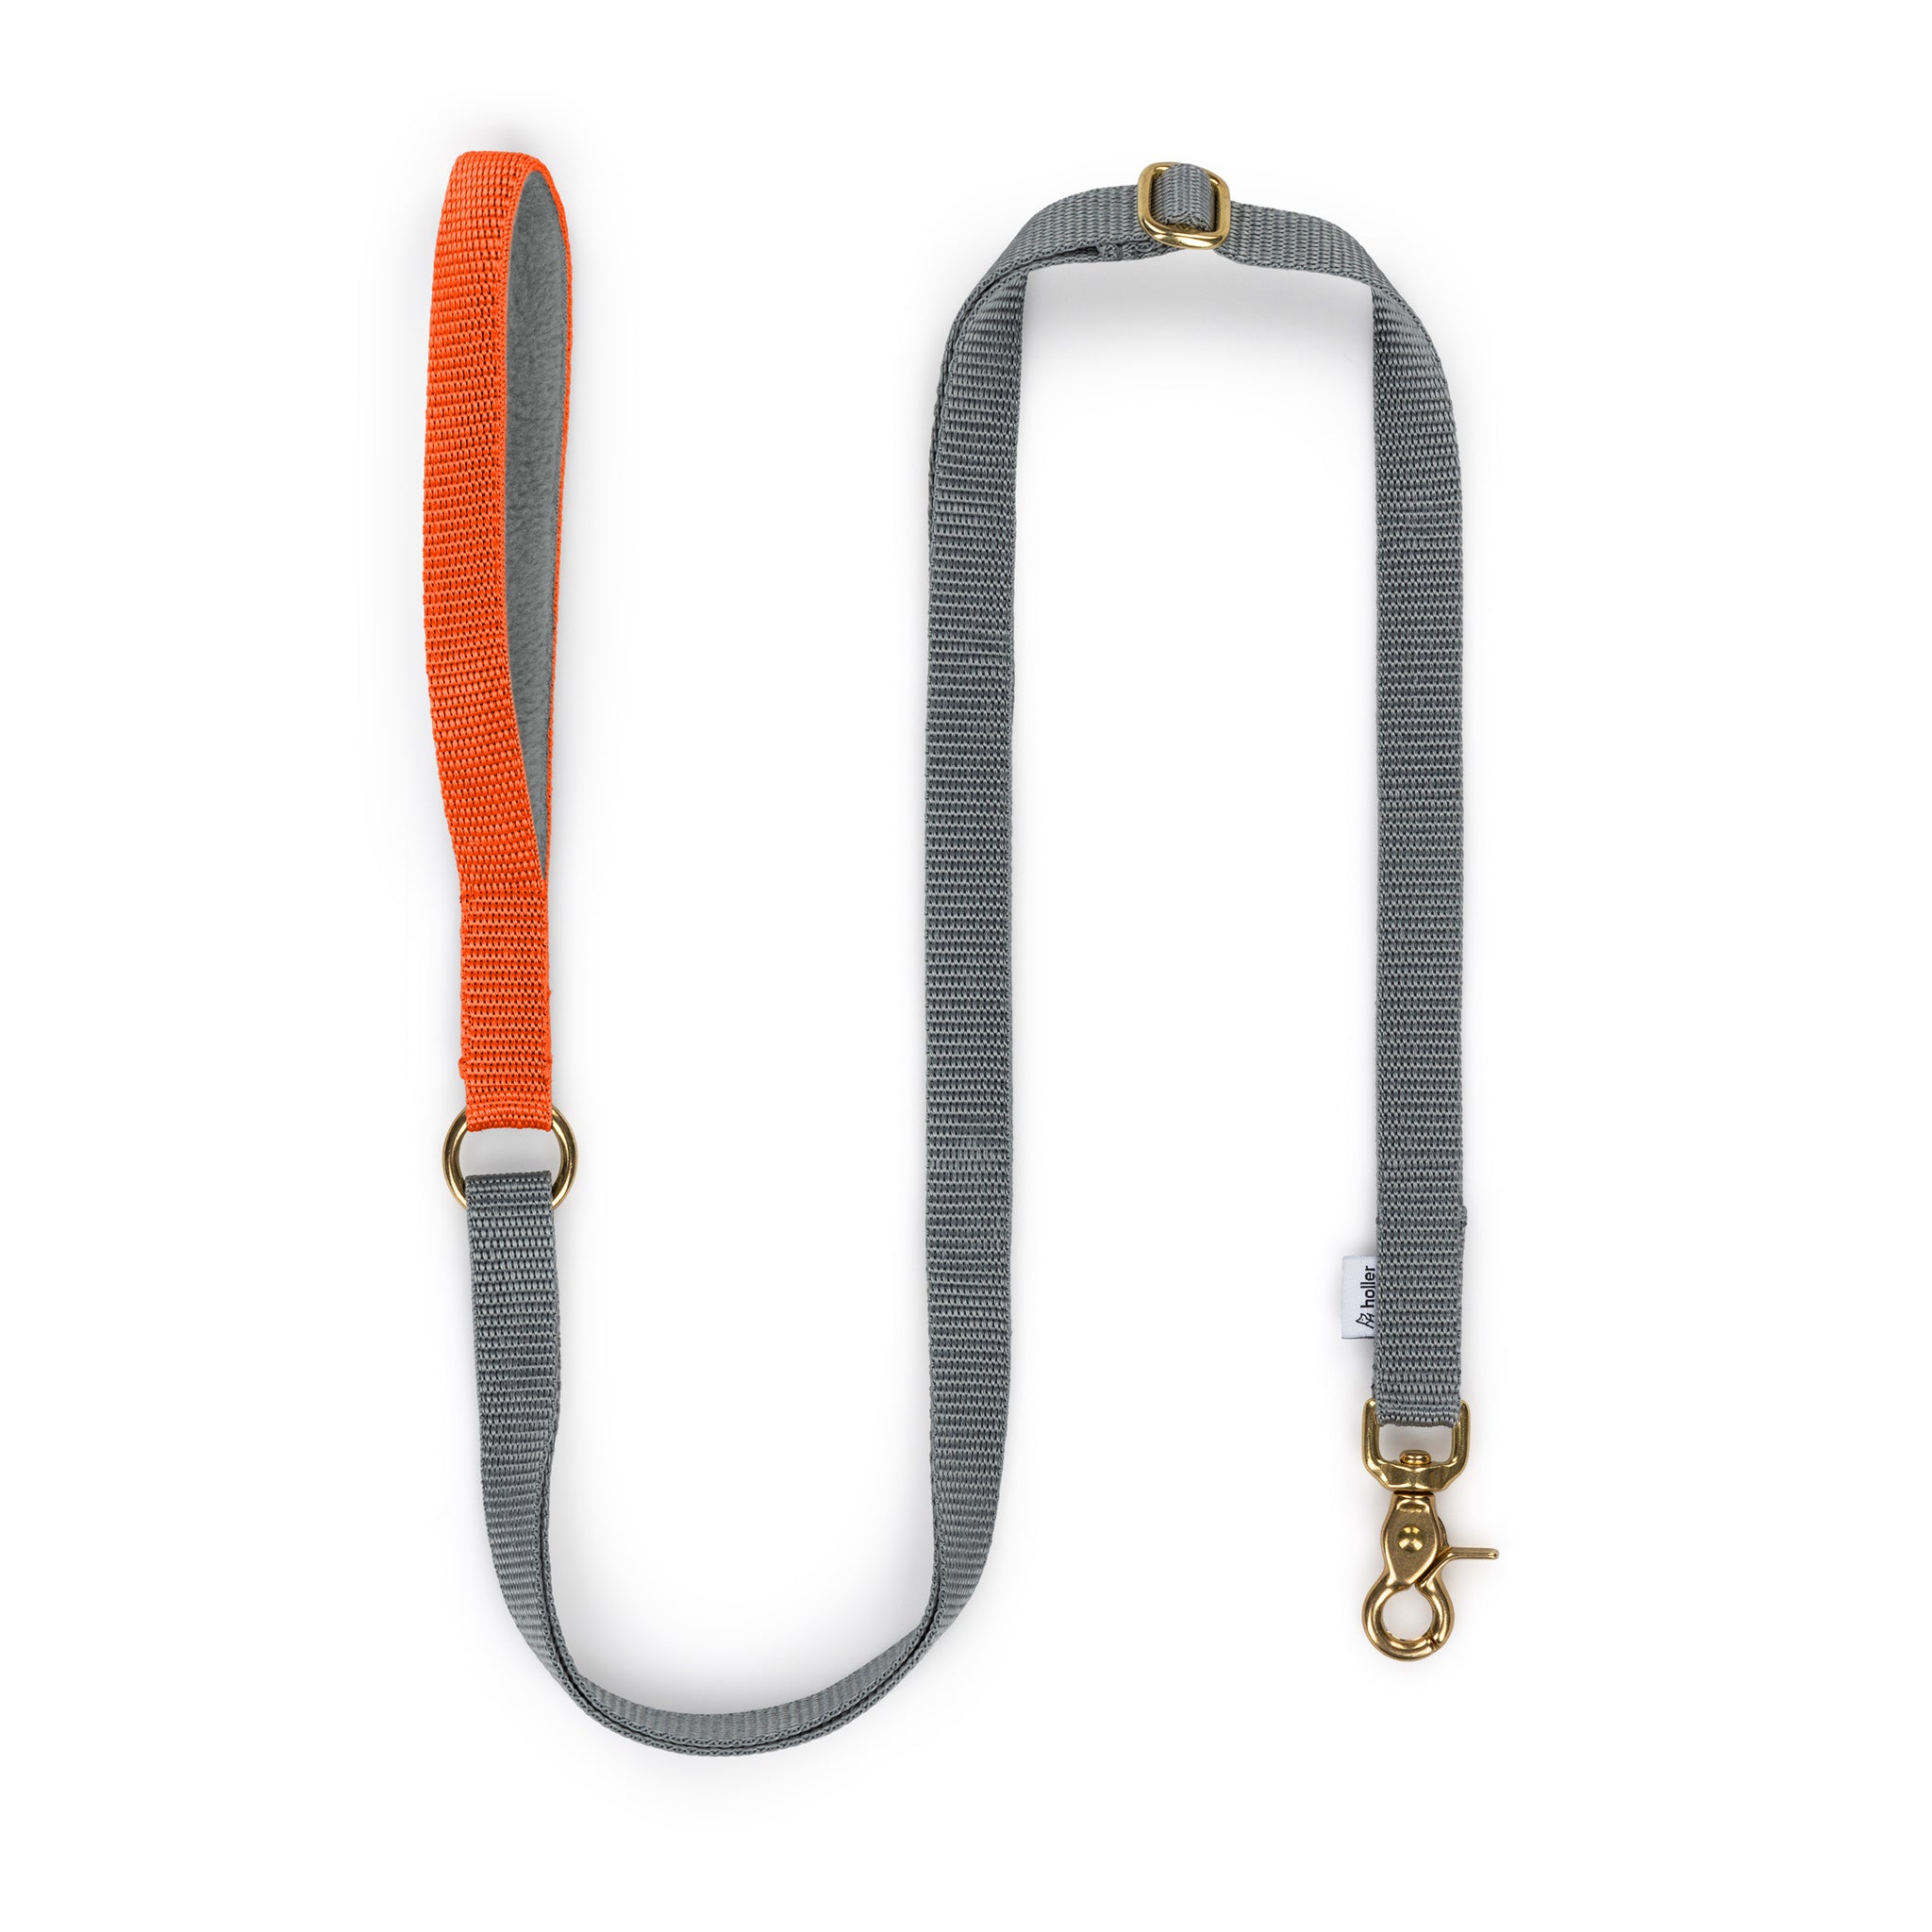 Grey + Olive Custom-made Extendable Lead - With Soft Touch Handle. - Pet Leashes - Holler Brighton - Holler Brighton